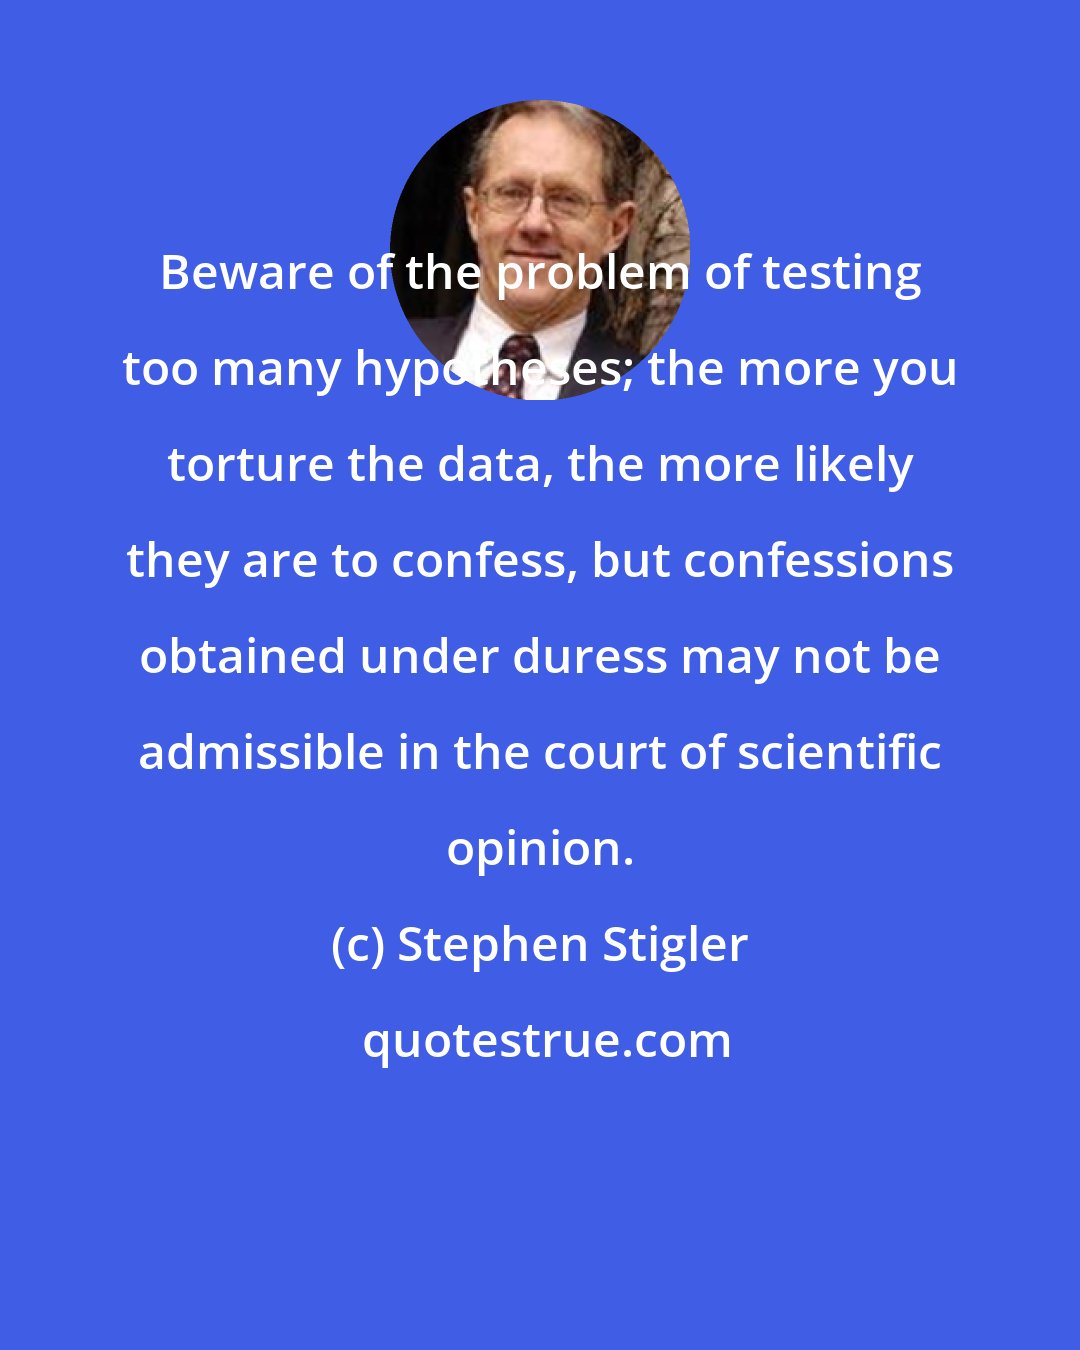 Stephen Stigler: Beware of the problem of testing too many hypotheses; the more you torture the data, the more likely they are to confess, but confessions obtained under duress may not be admissible in the court of scientific opinion.